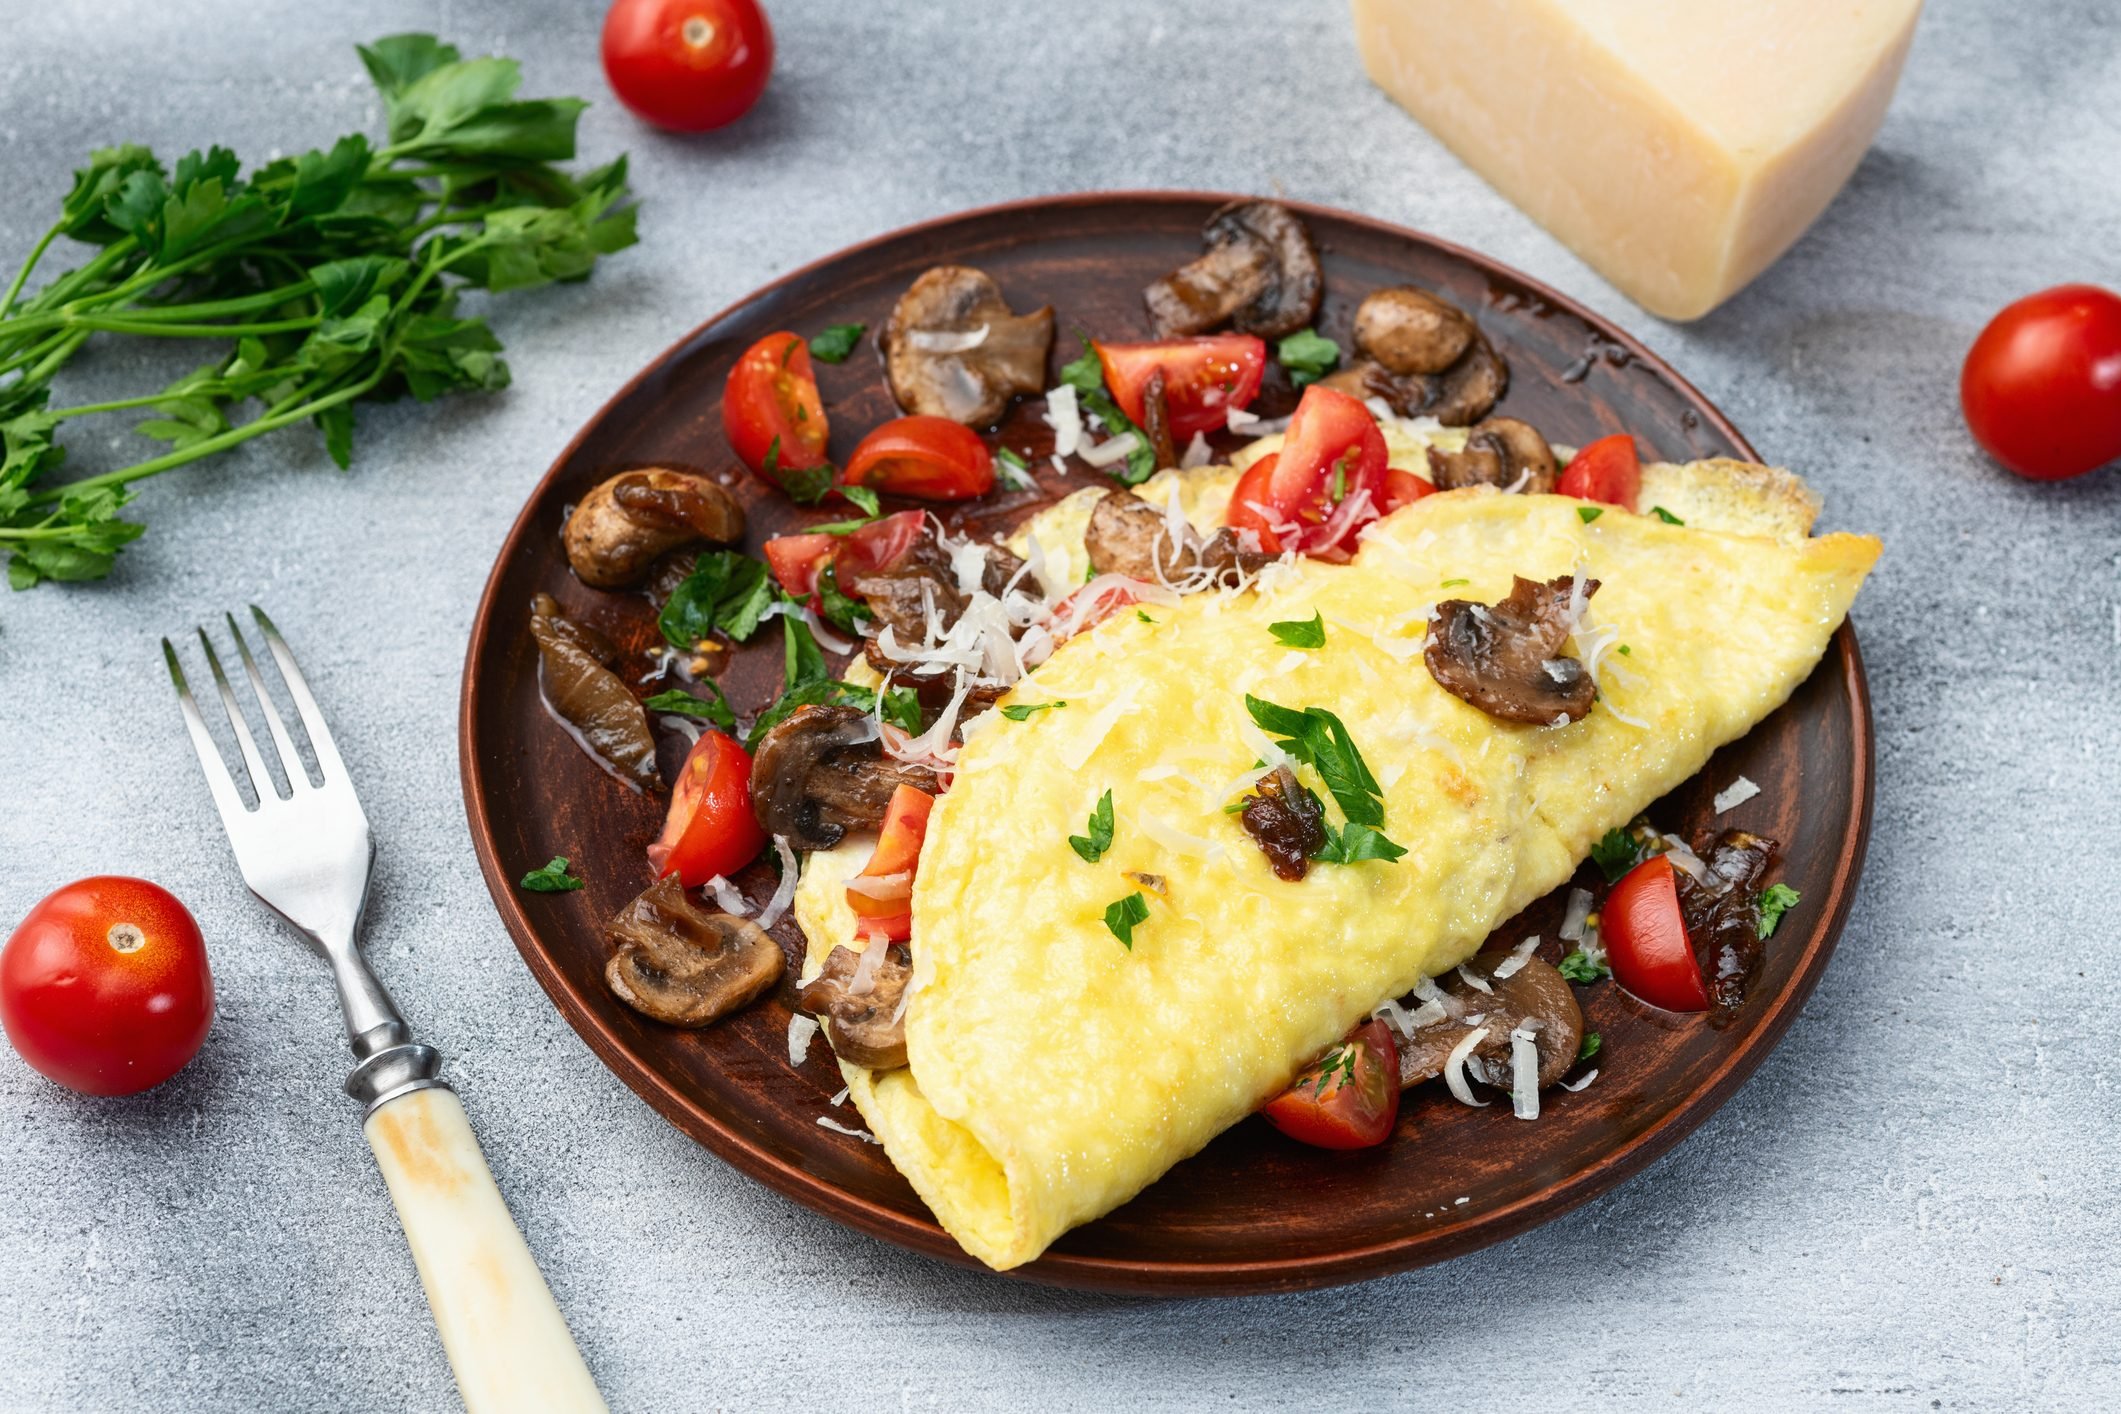 Omelette stuffed with mushrooms , tomatoes and parsley